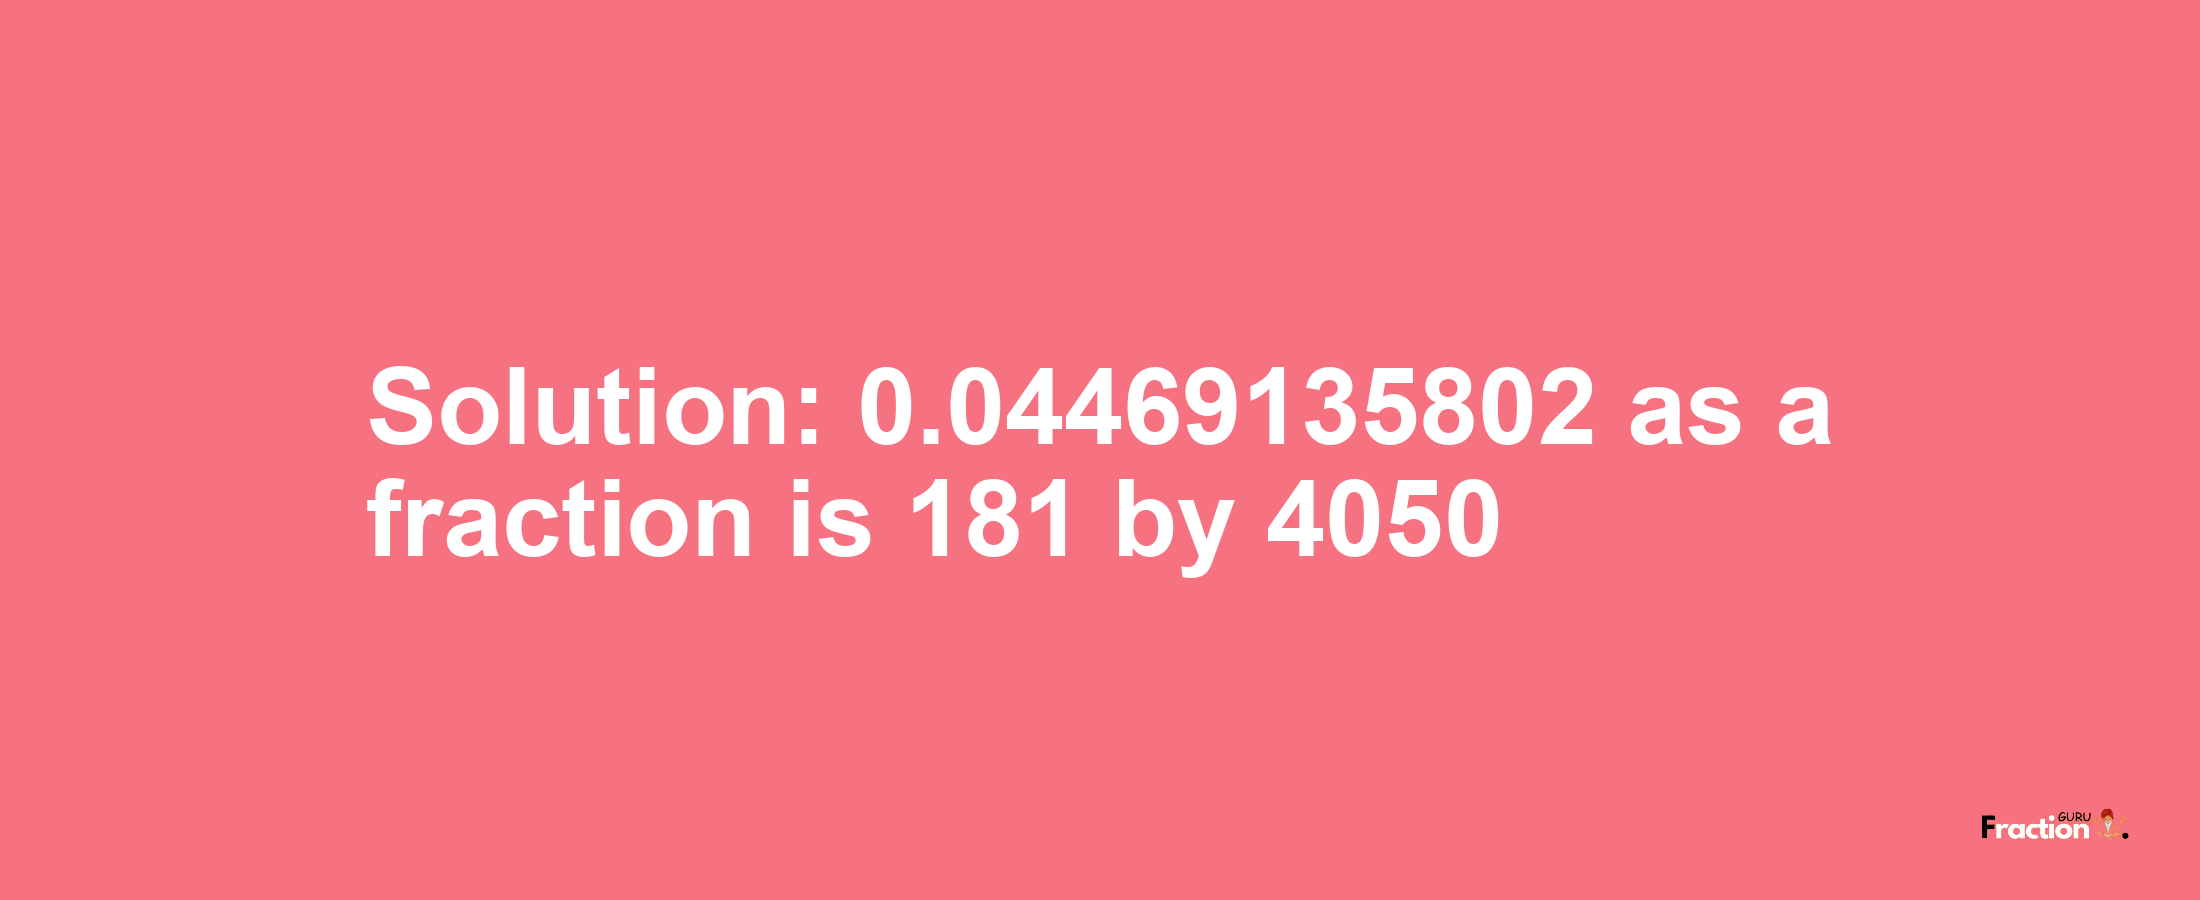 Solution:0.04469135802 as a fraction is 181/4050